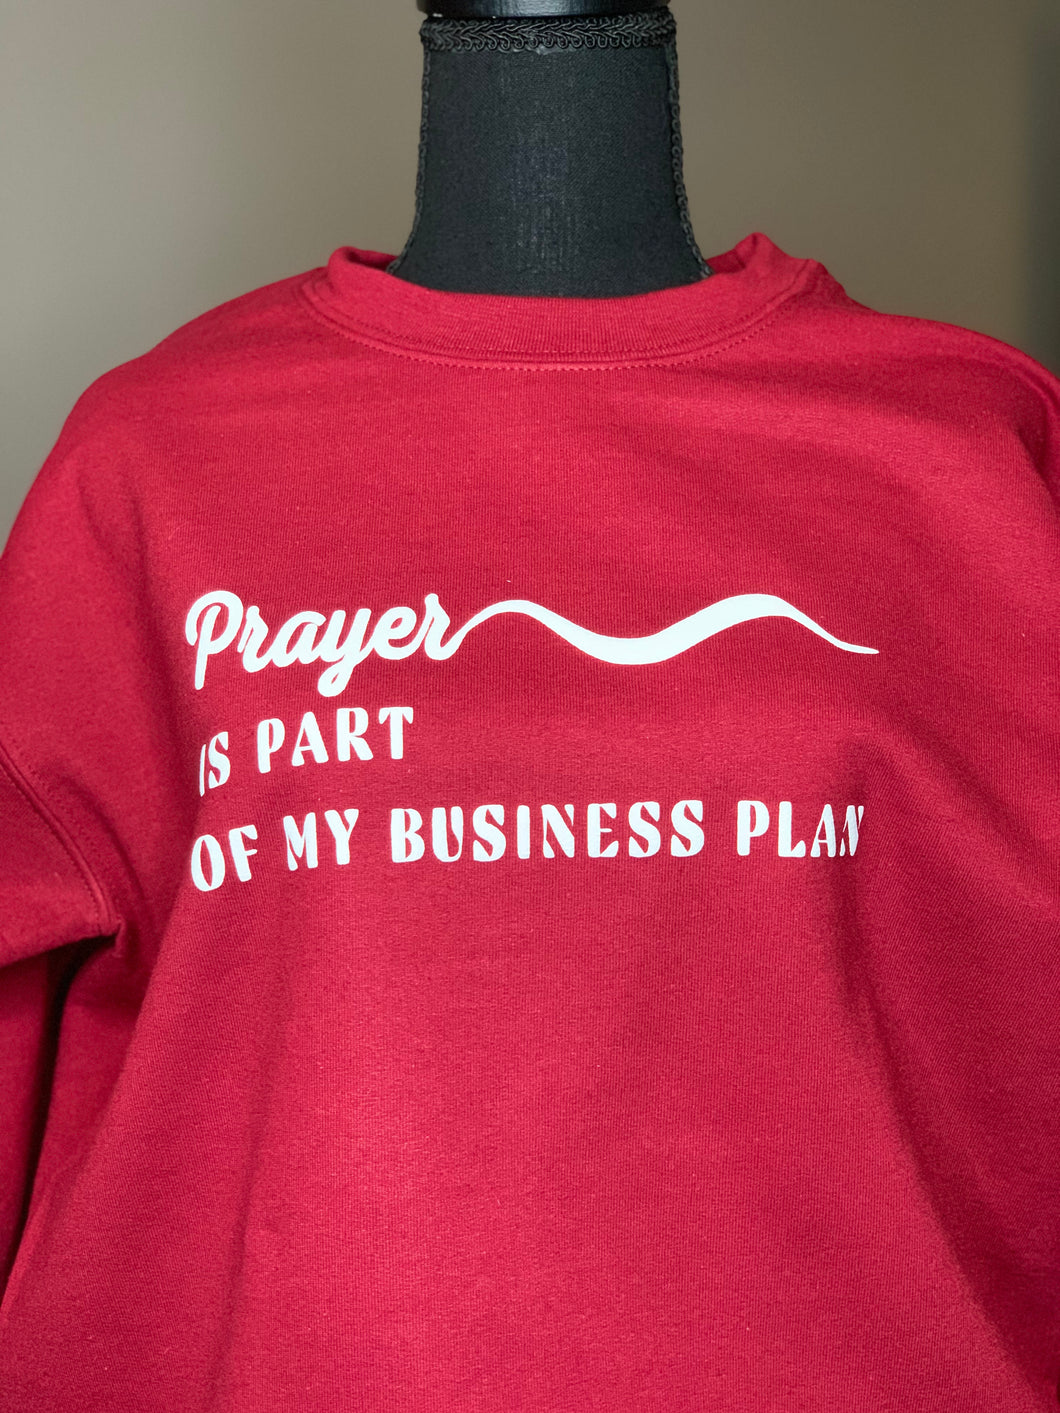 Prayer is part of my business plan